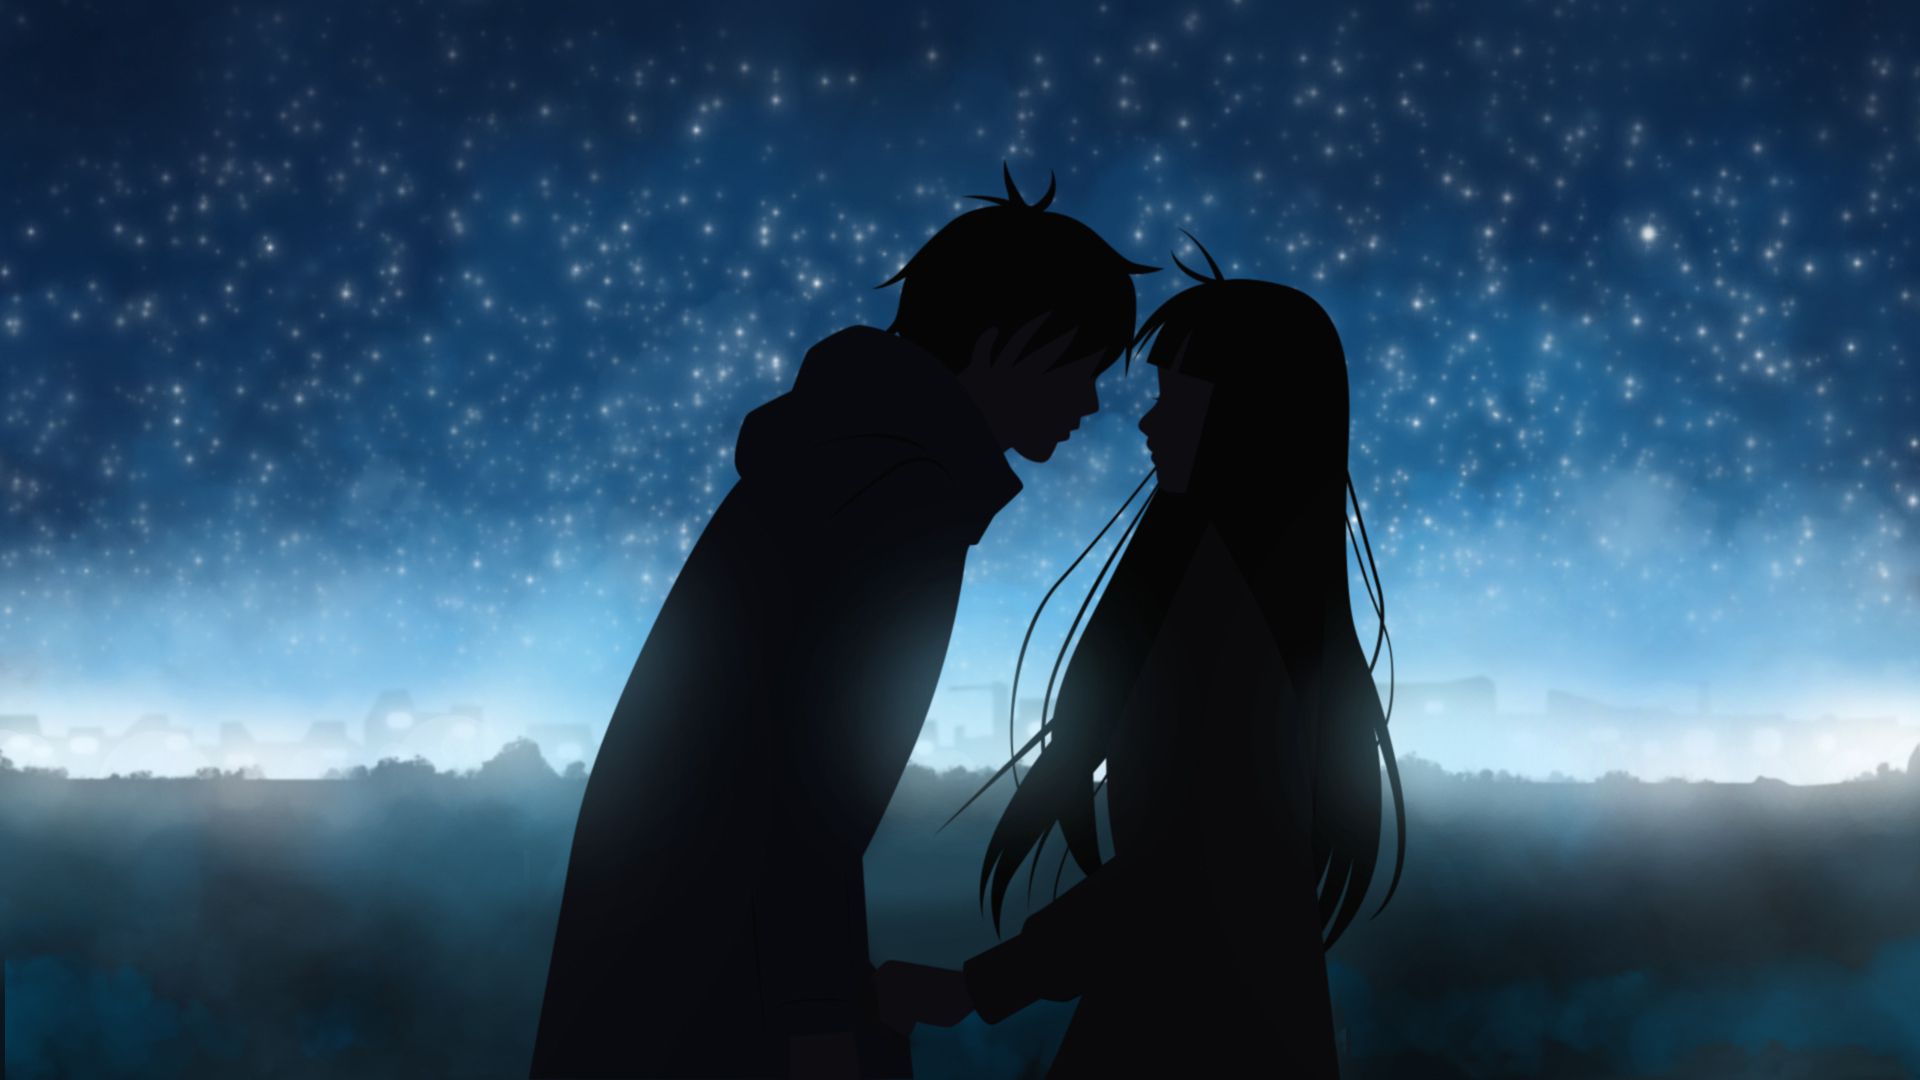 Anime Romantic Images Wallpapers HD Free Download